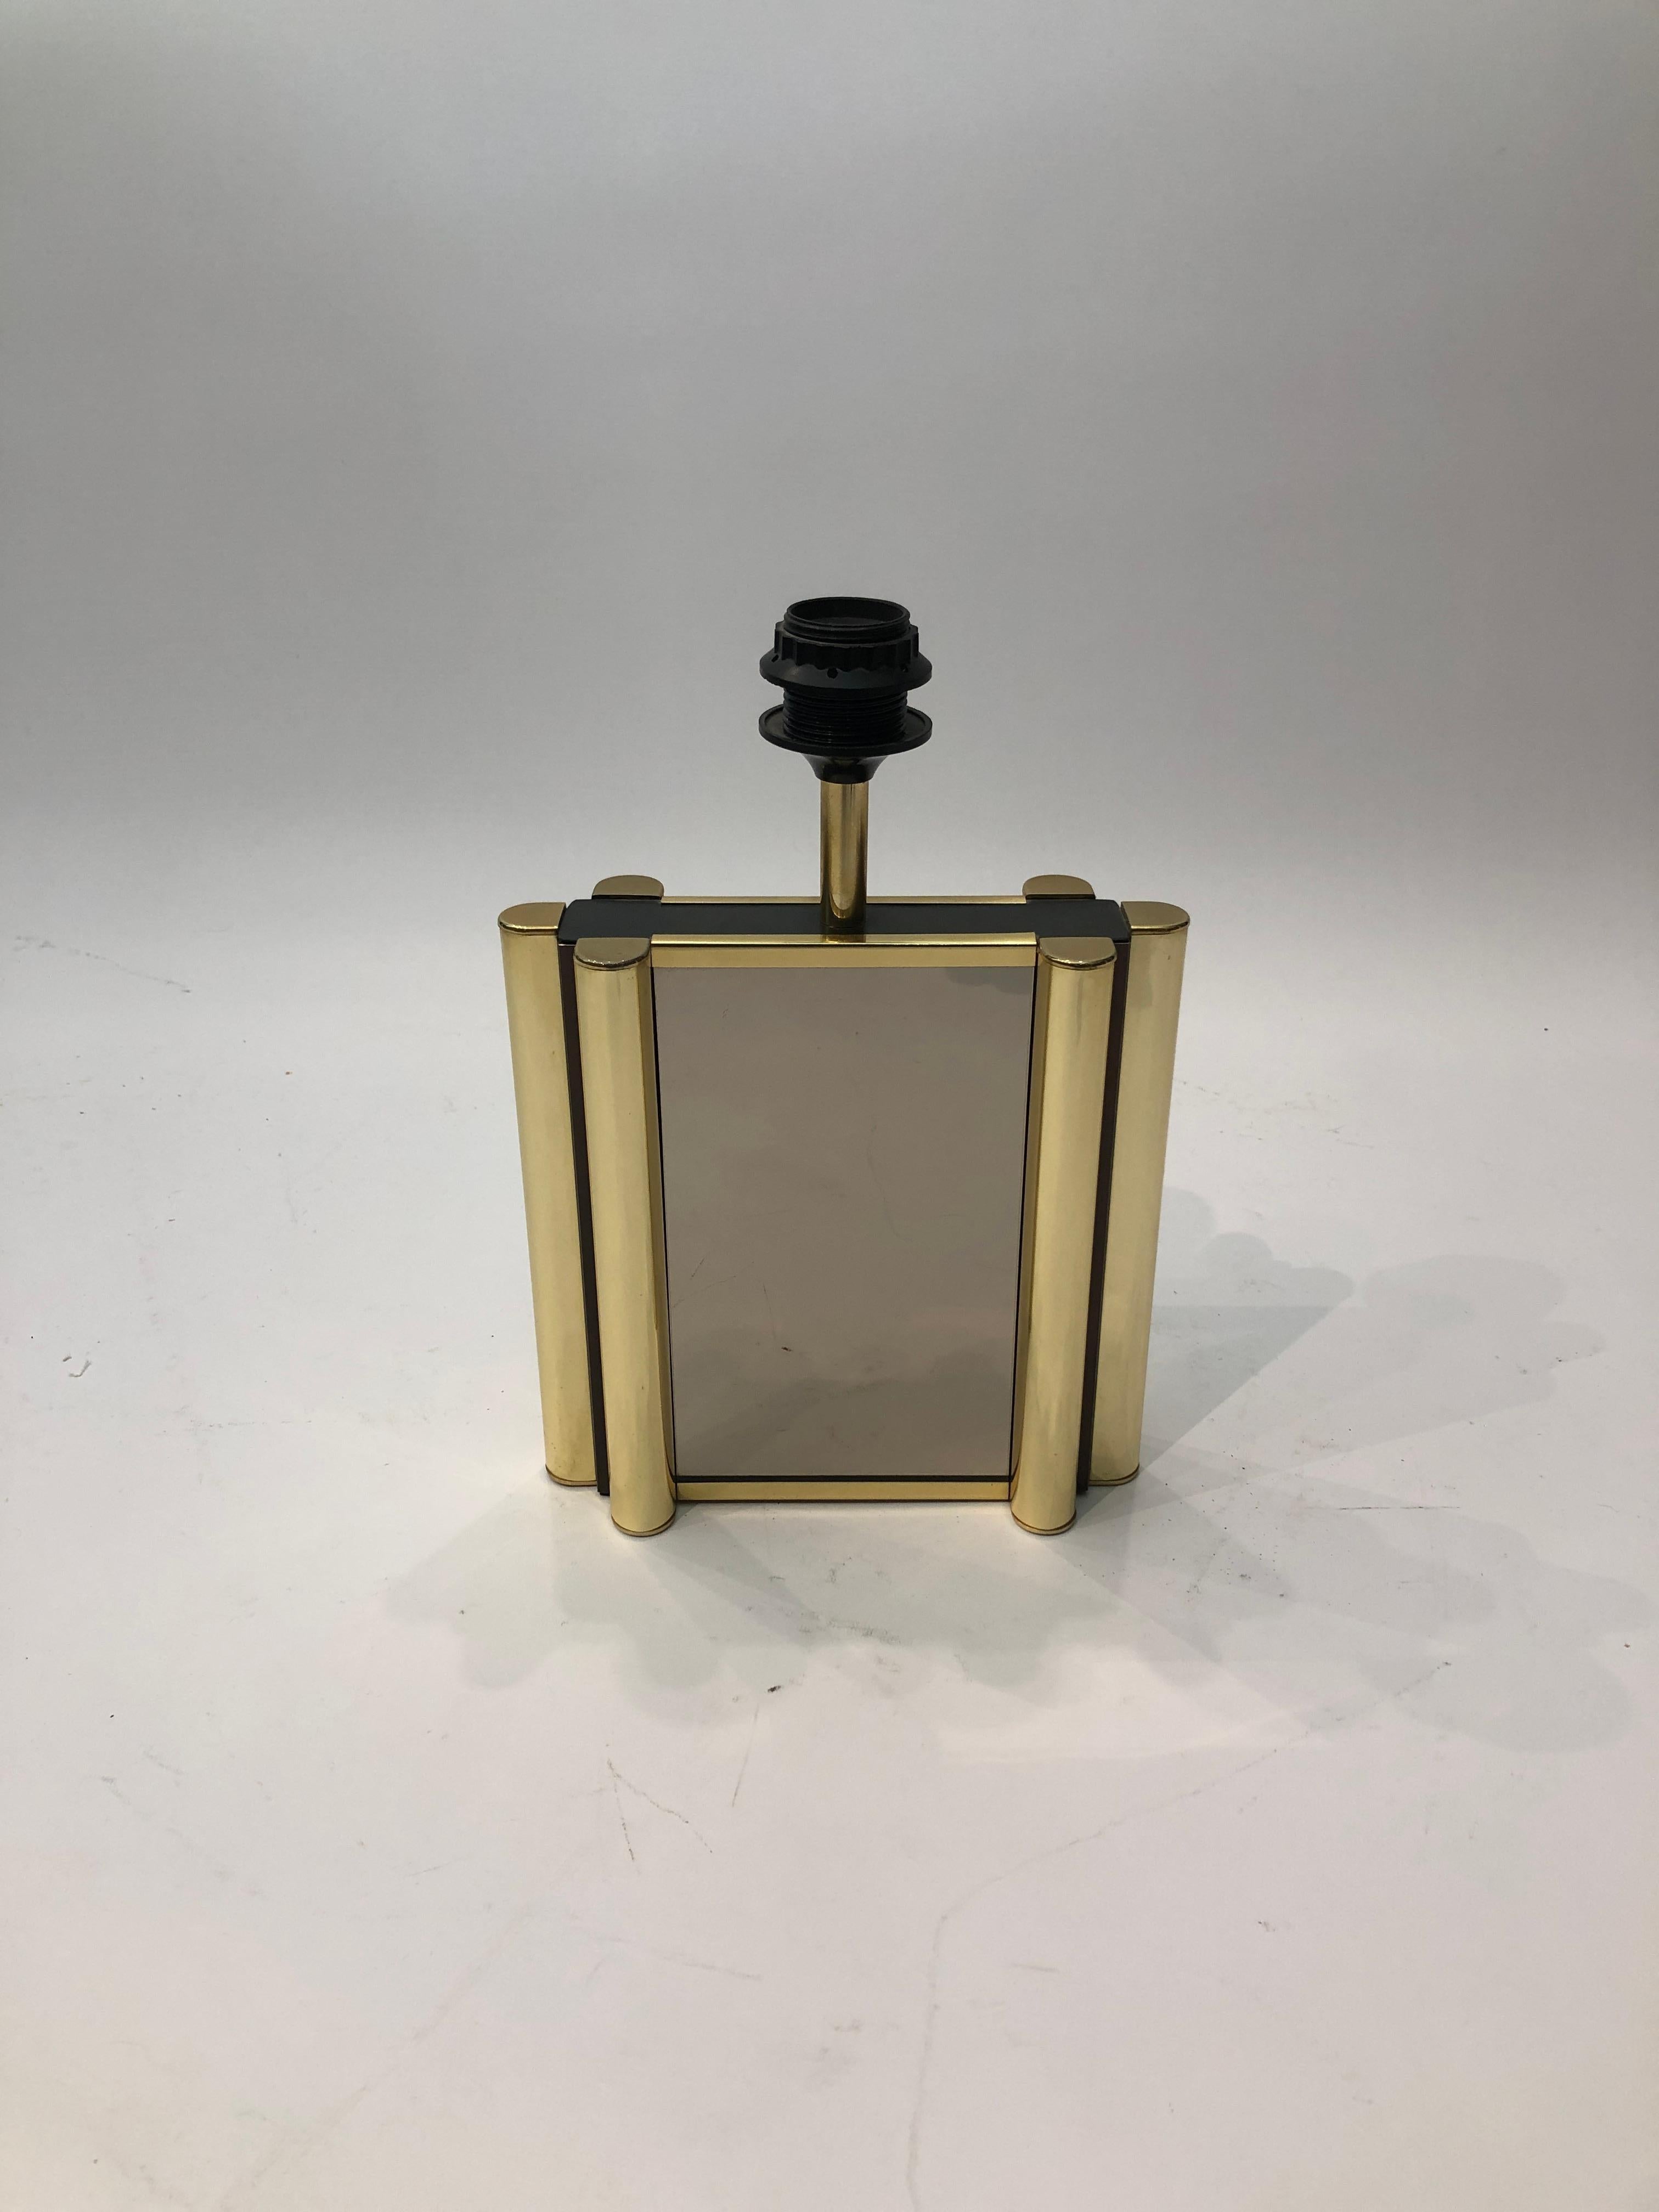 This amazing yet simple table lamp was produced in France during the vibrant era of the 1970s. It embodies the timeless elegance of French design from that period. The smoked mirrors on each side are surrounded by three brass-plated frame with